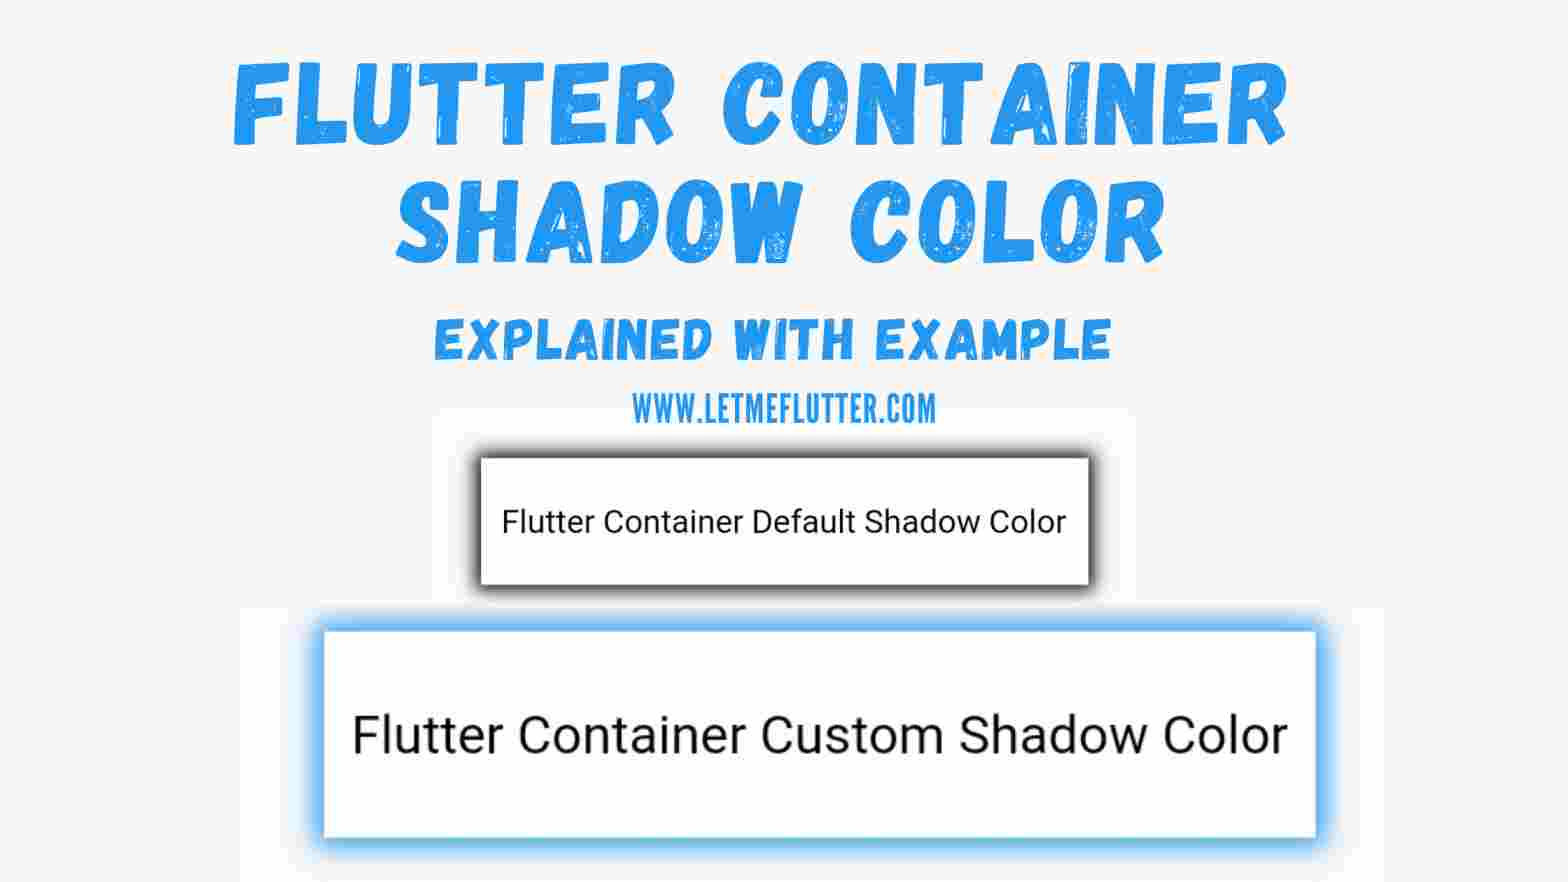 Flutter container shadow color